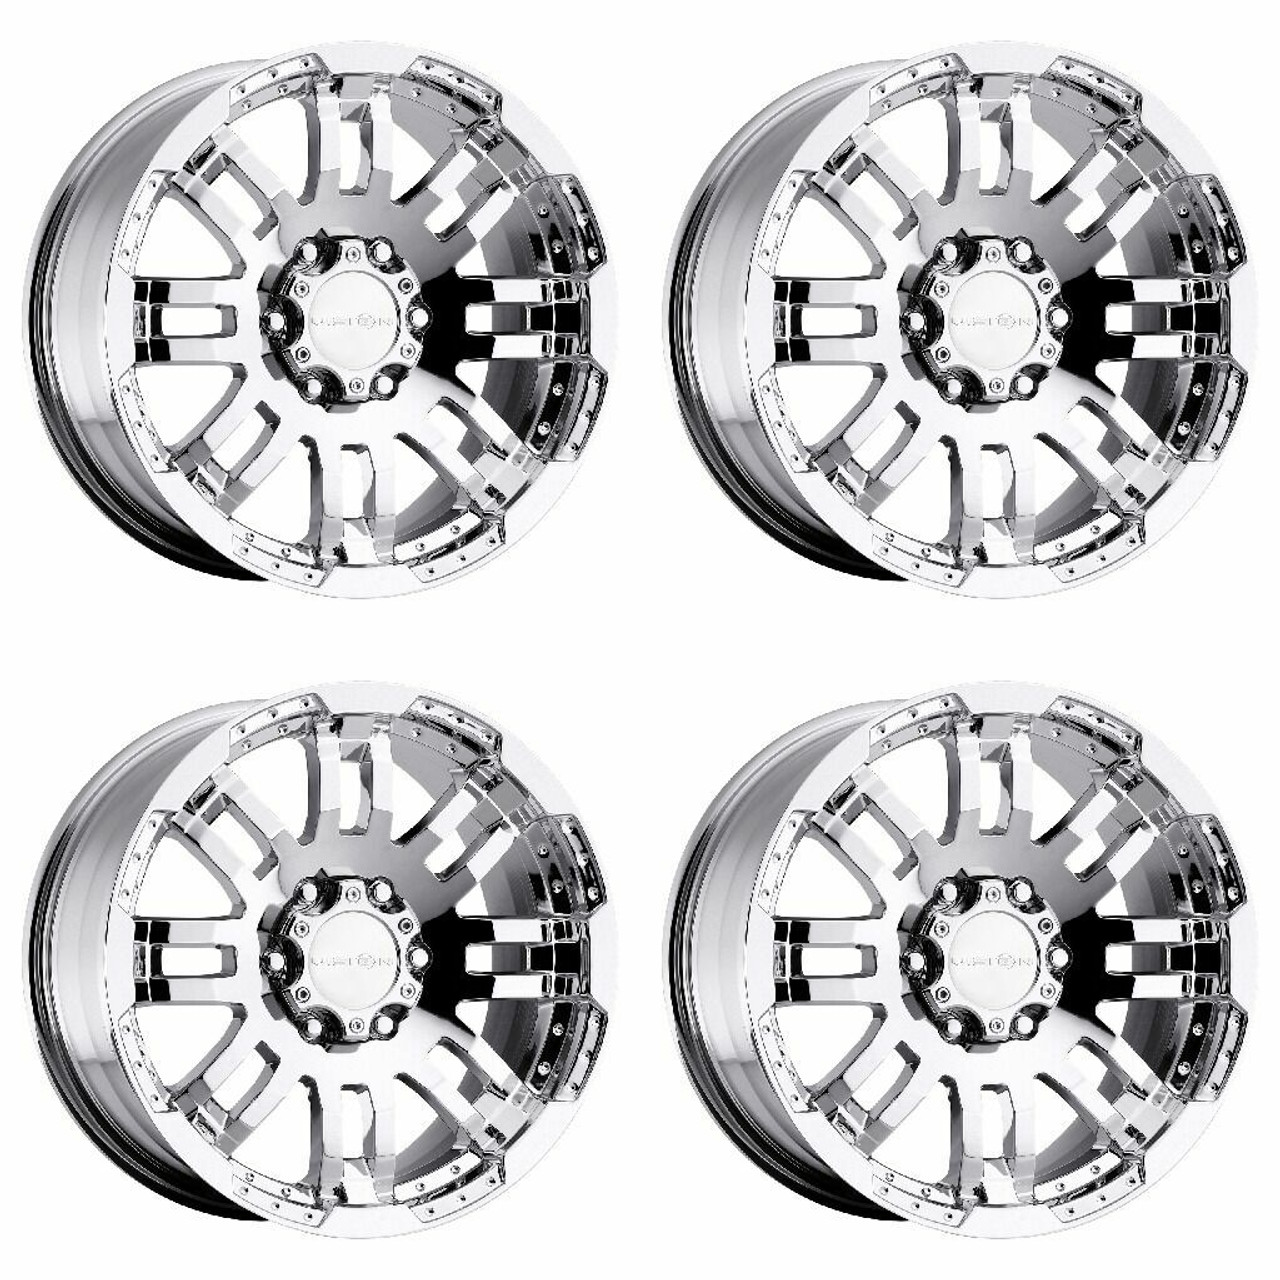 Set 4 18" Vision Off-Road 375 Warrior Winter Paint-Silver 18x8.5 5x5.5 Rims 18mm